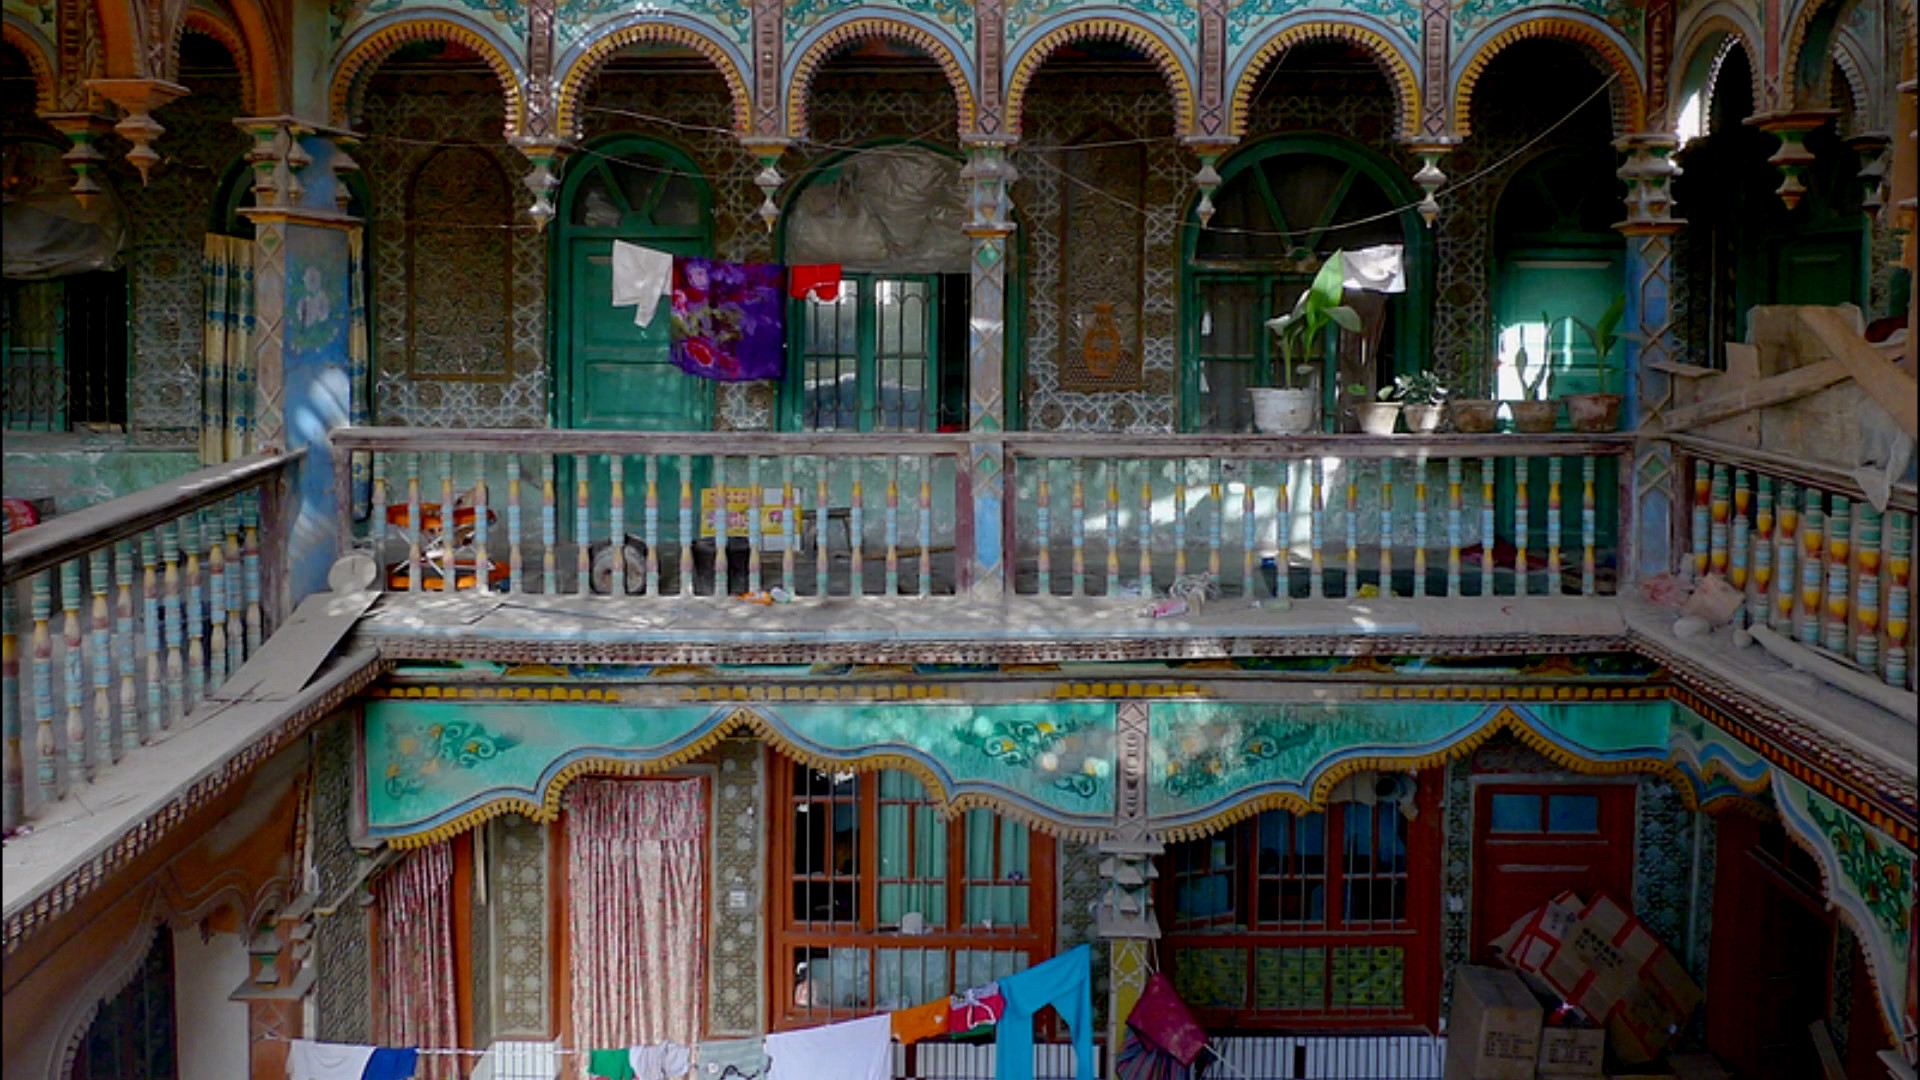 Uyghur architectural style